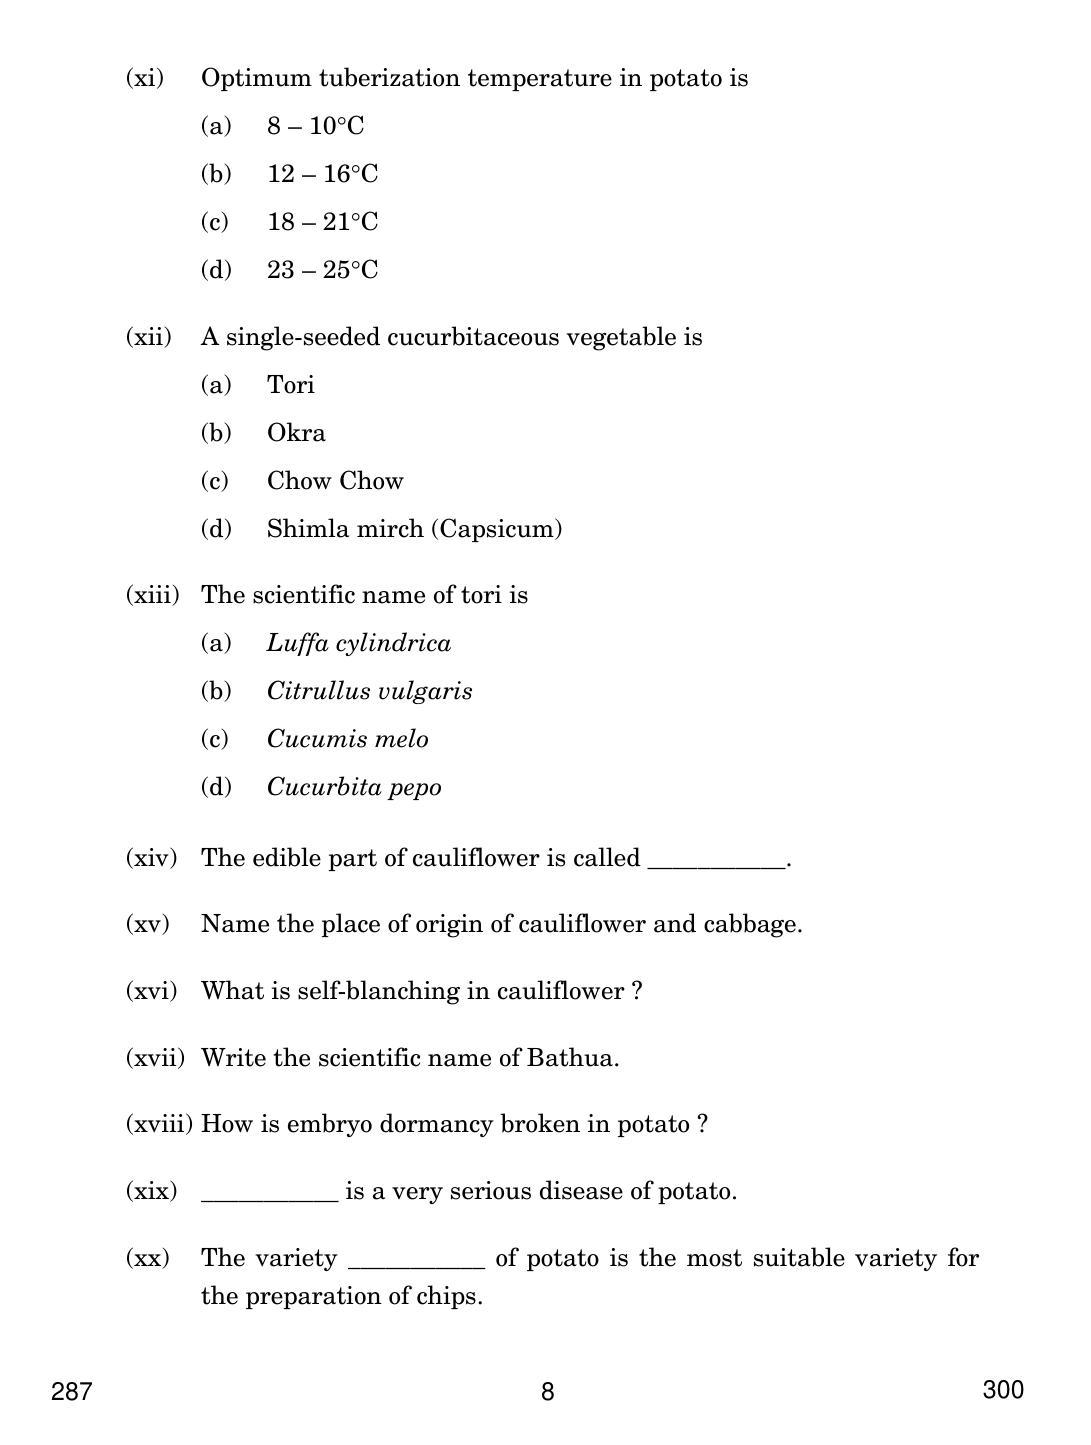 CBSE Class 12 287 OLERICULTURE 2018 Question Paper - Page 8